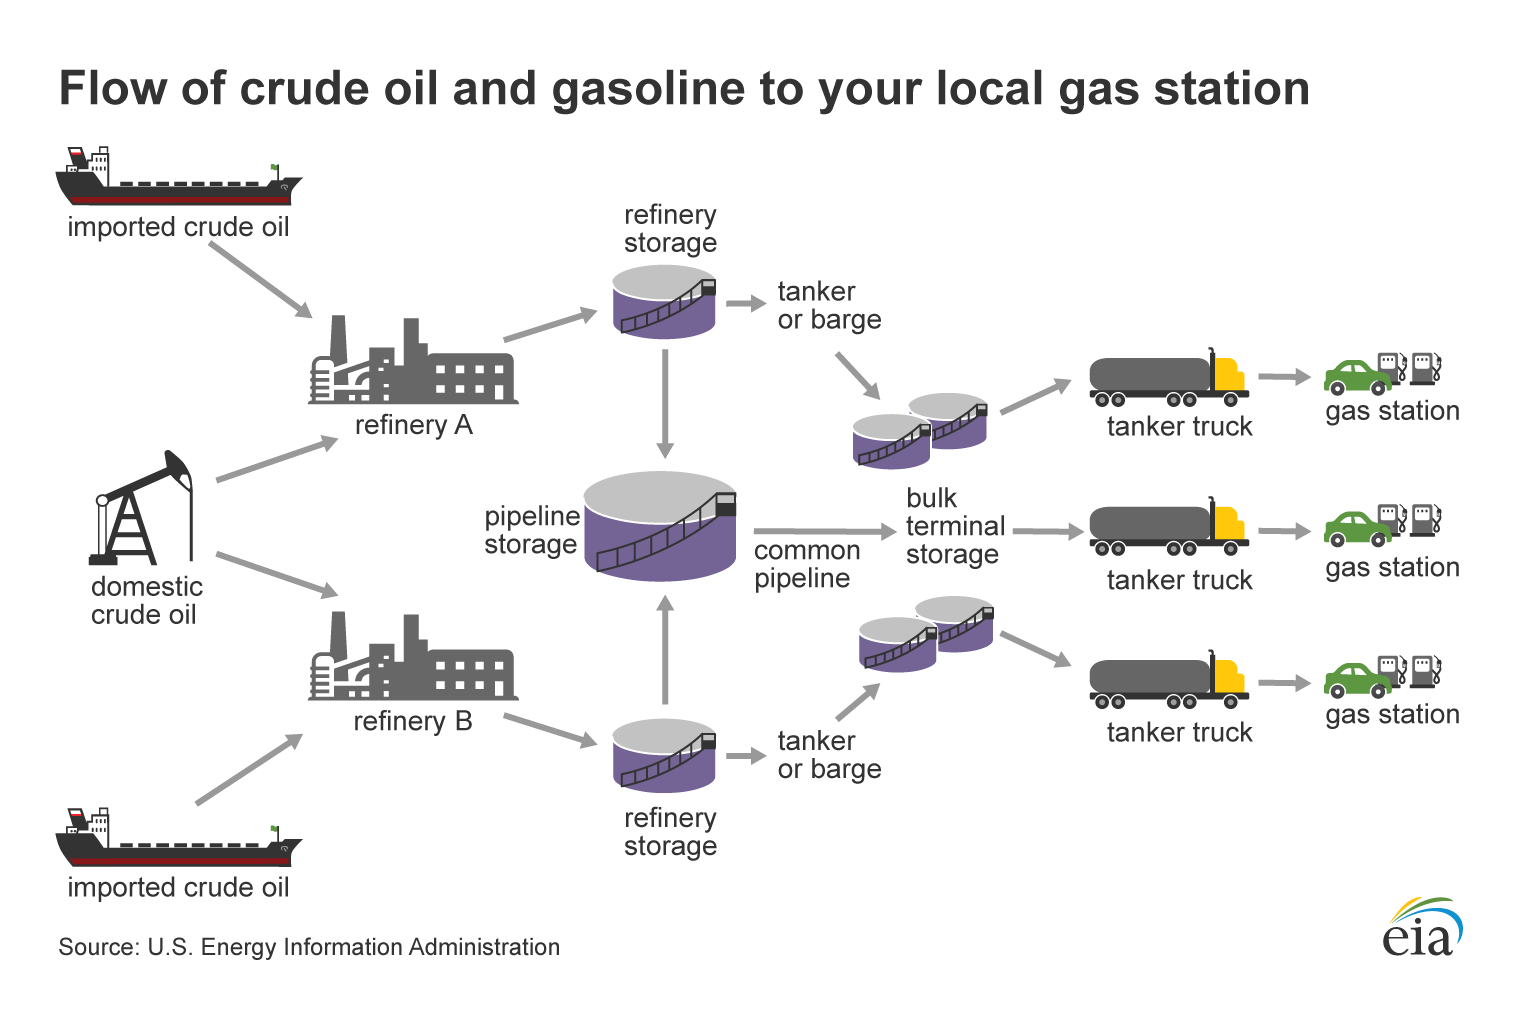 Flow of Crude oil and Gasoline to your pump